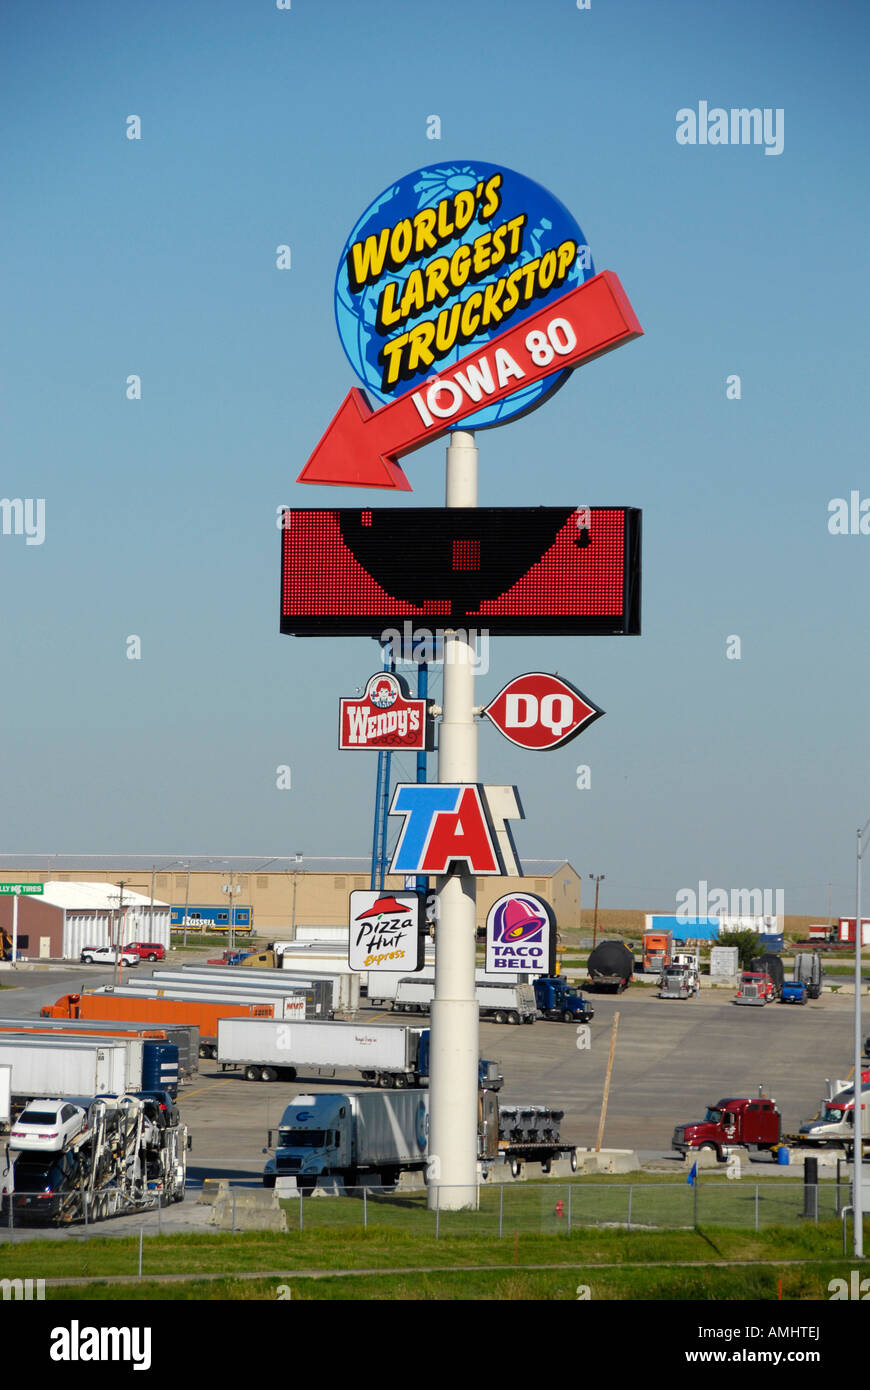 Iowa 80 is the largest truck rest stop in the world located on